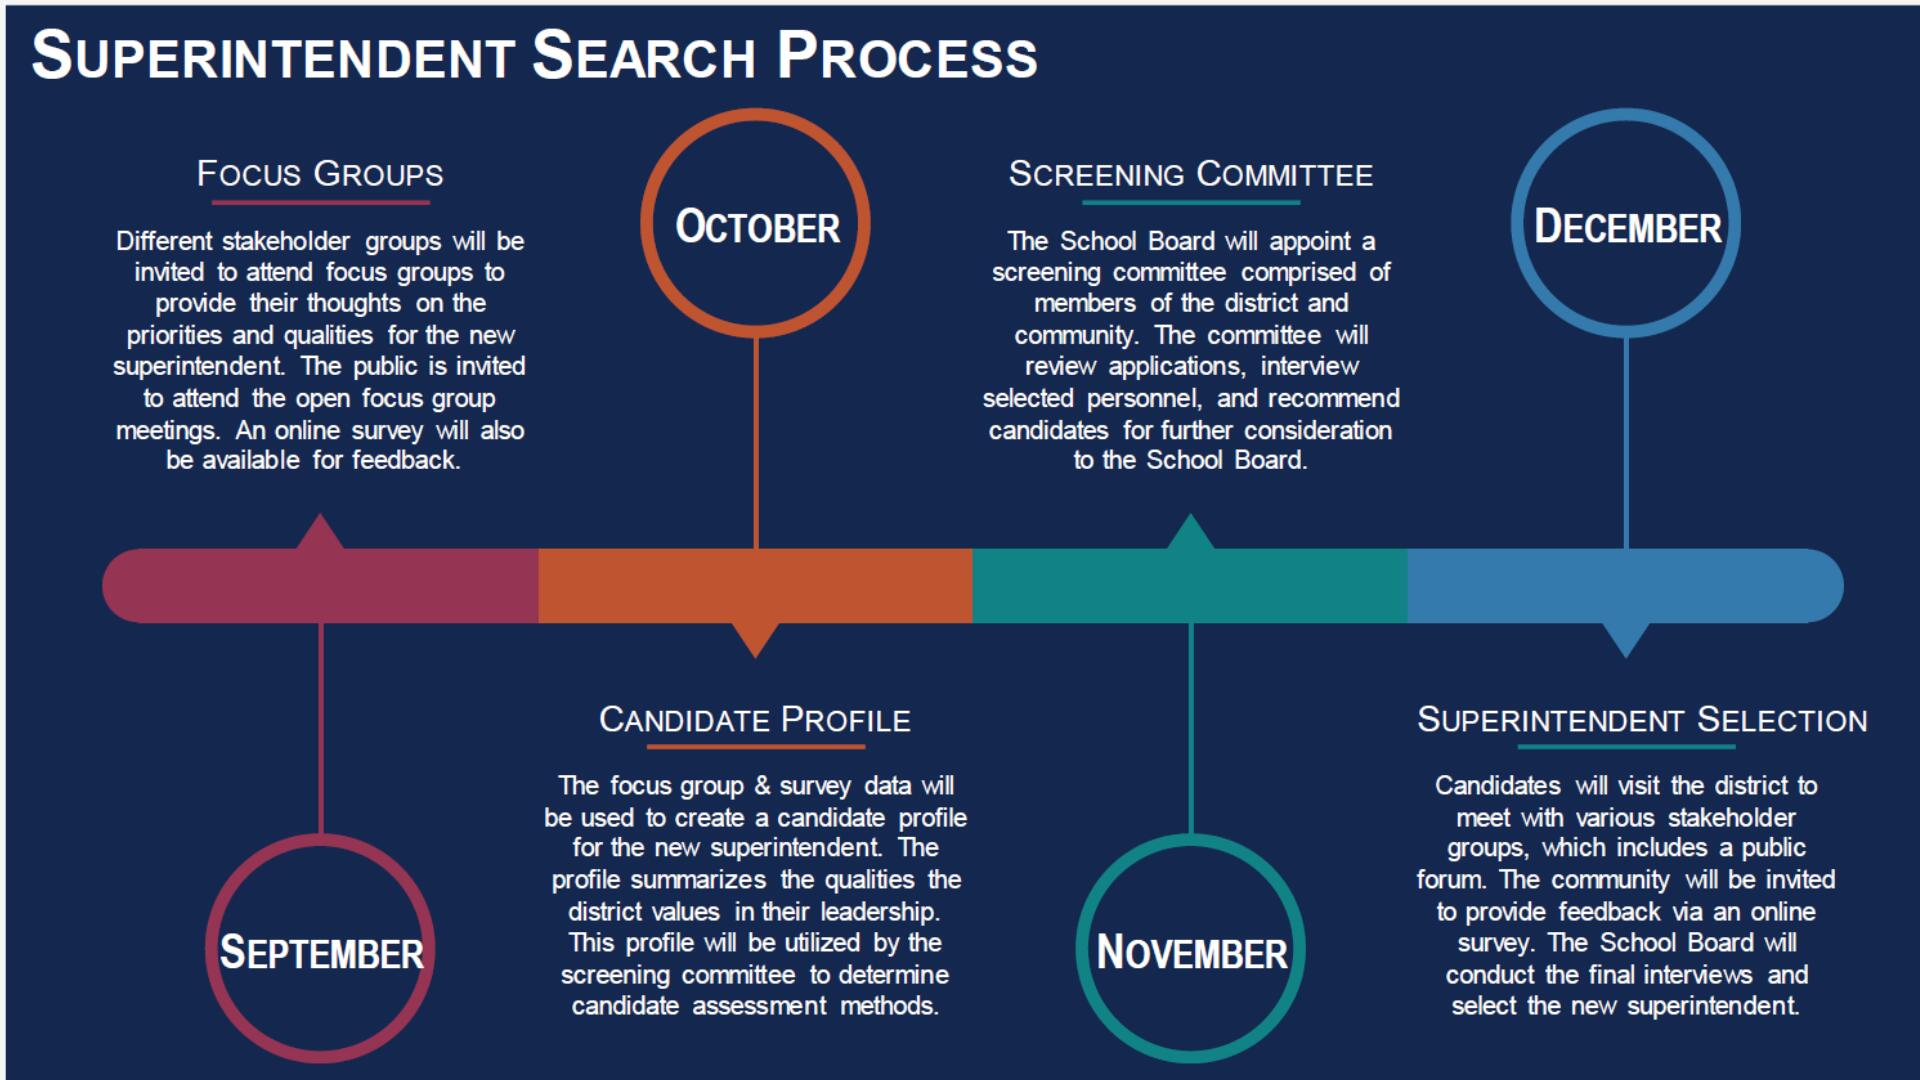 A graphic image explaining the next steps are in September to host focus groups, October data will be used to create a candidate profile, in November the School Board will appoint a screening committee, and in December candidates will visit the district.